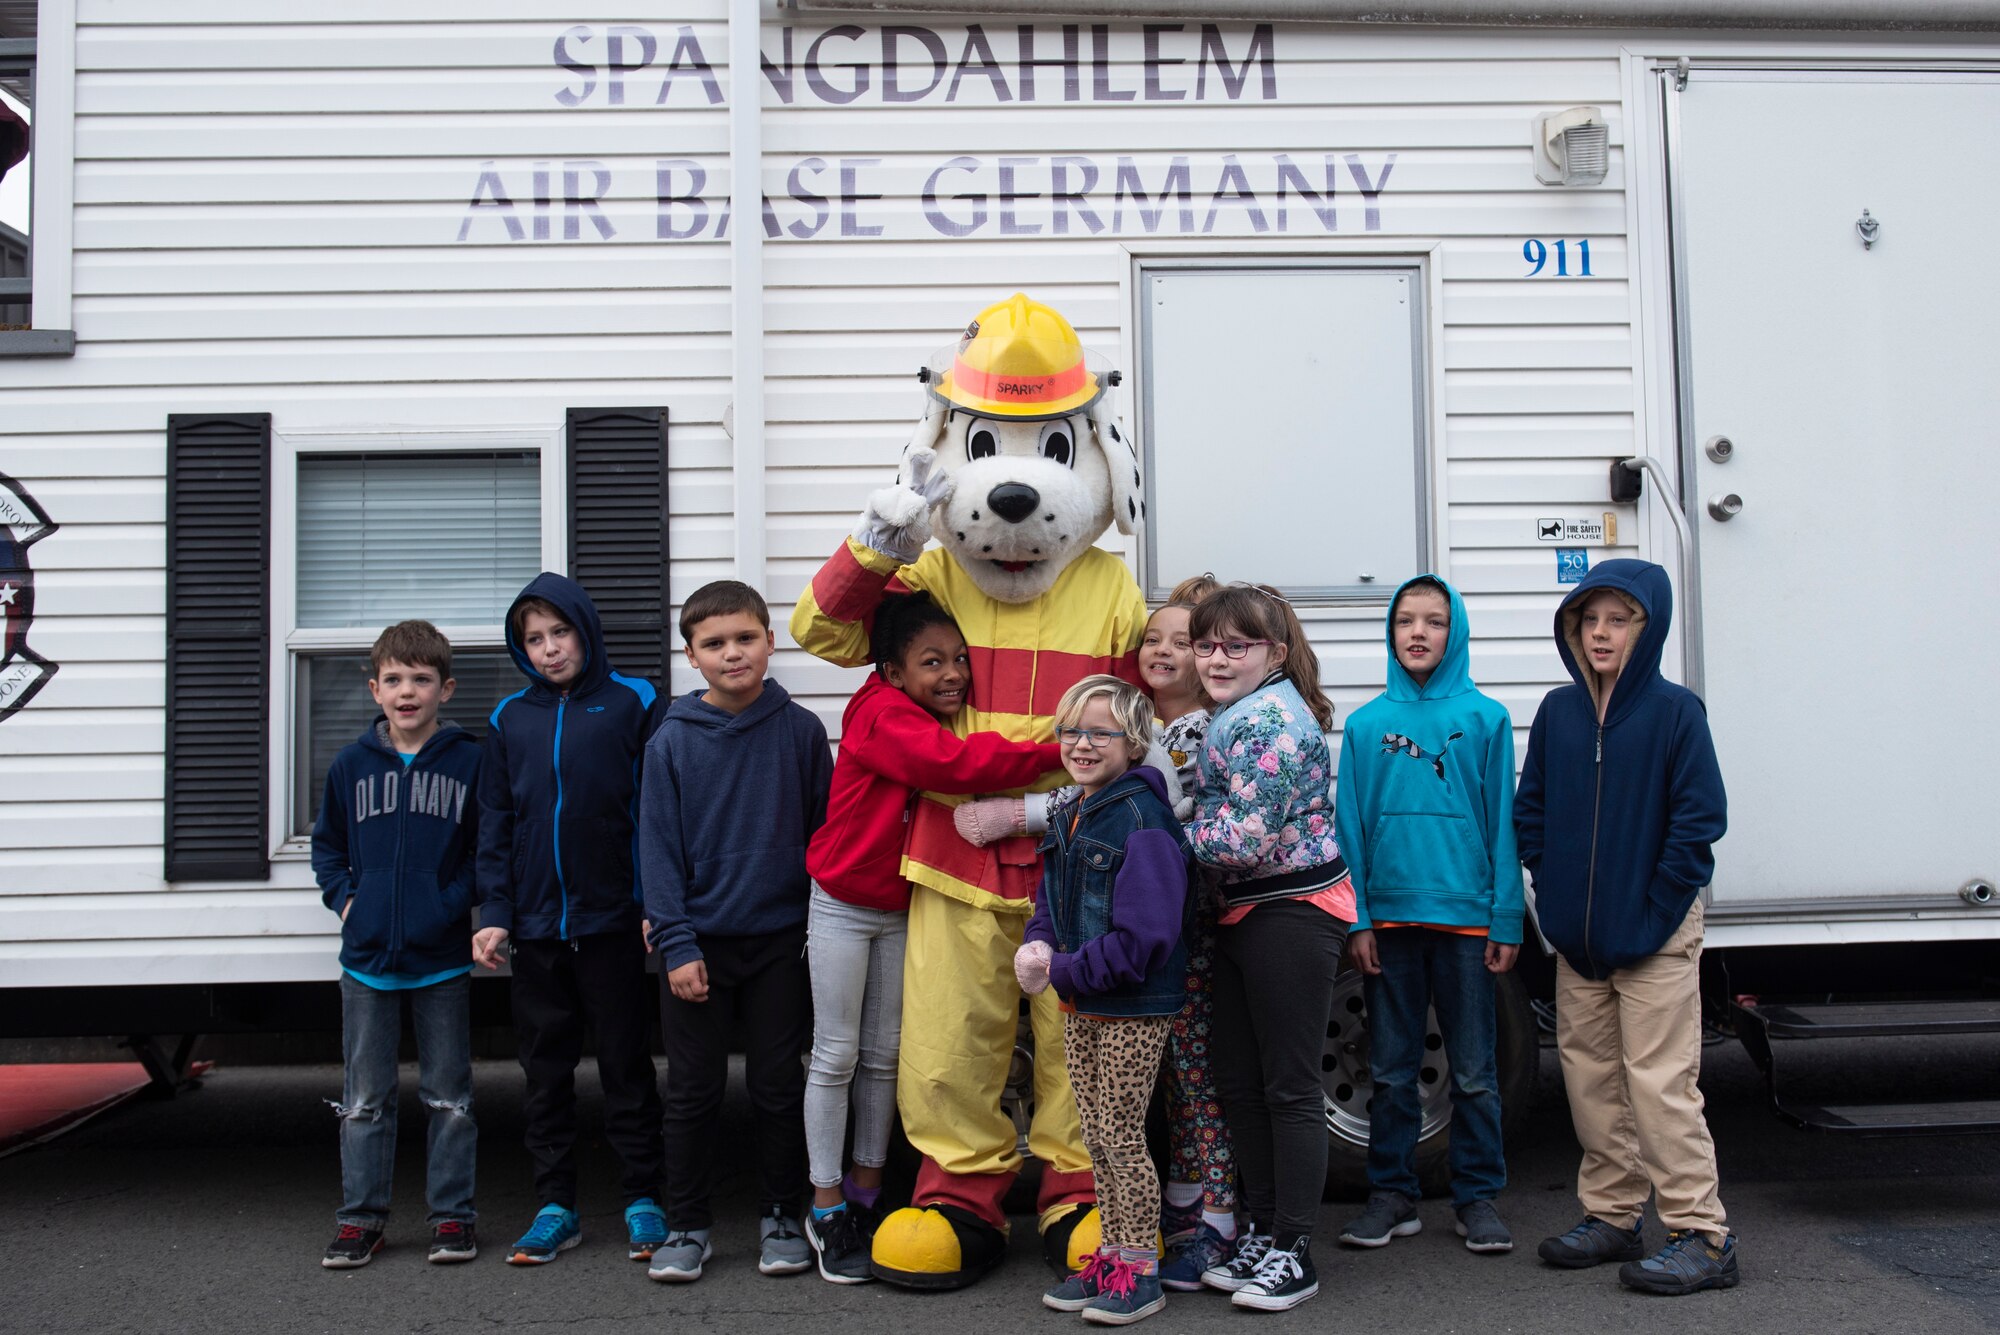 Students at Spangdahlem Elementary School pose for a photo with Sparky the Fire Dog outside the smoke demonstration trailer at Spangdahlem Air Base, Germany, Oct. 23, 2019. The smoke trailer provided students a first-hand experience on what to do in the case of a fire. (U.S. Air Force photo by Airman 1st Class Alison Stewart)